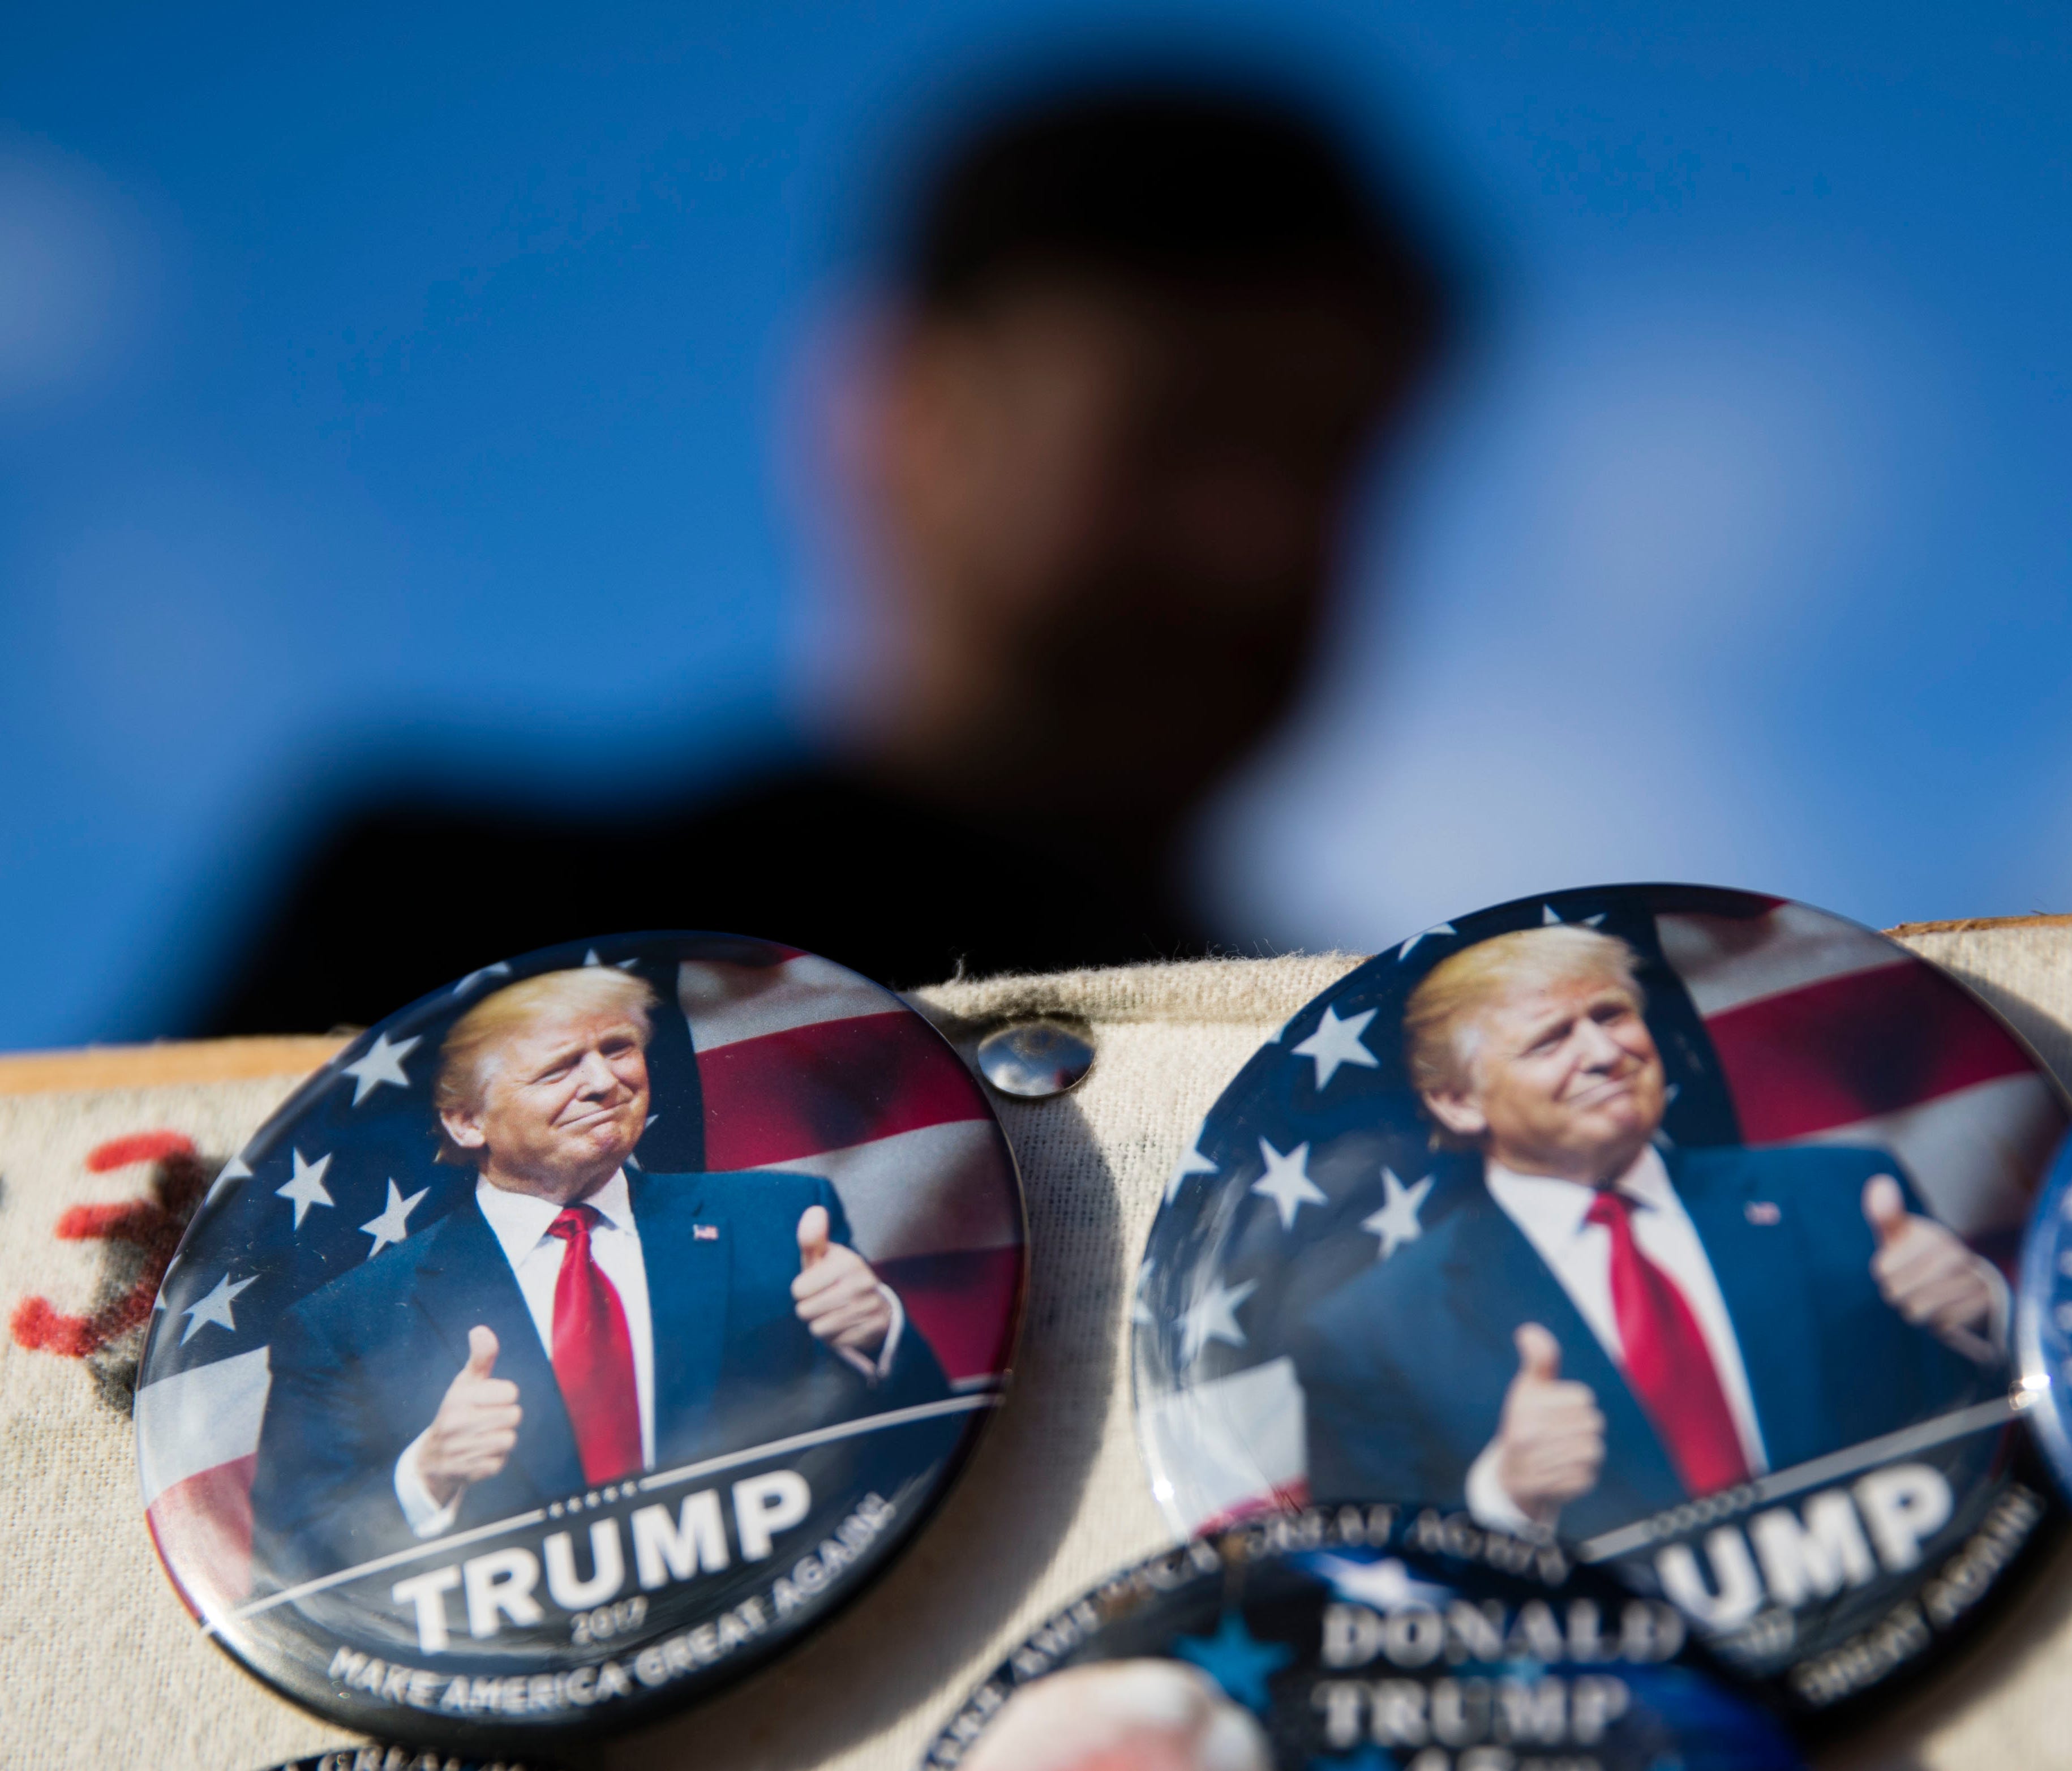 Buttons for sale are posted as preparations continue for Friday's presidential inauguration of Donald Trump in Washington D.C.